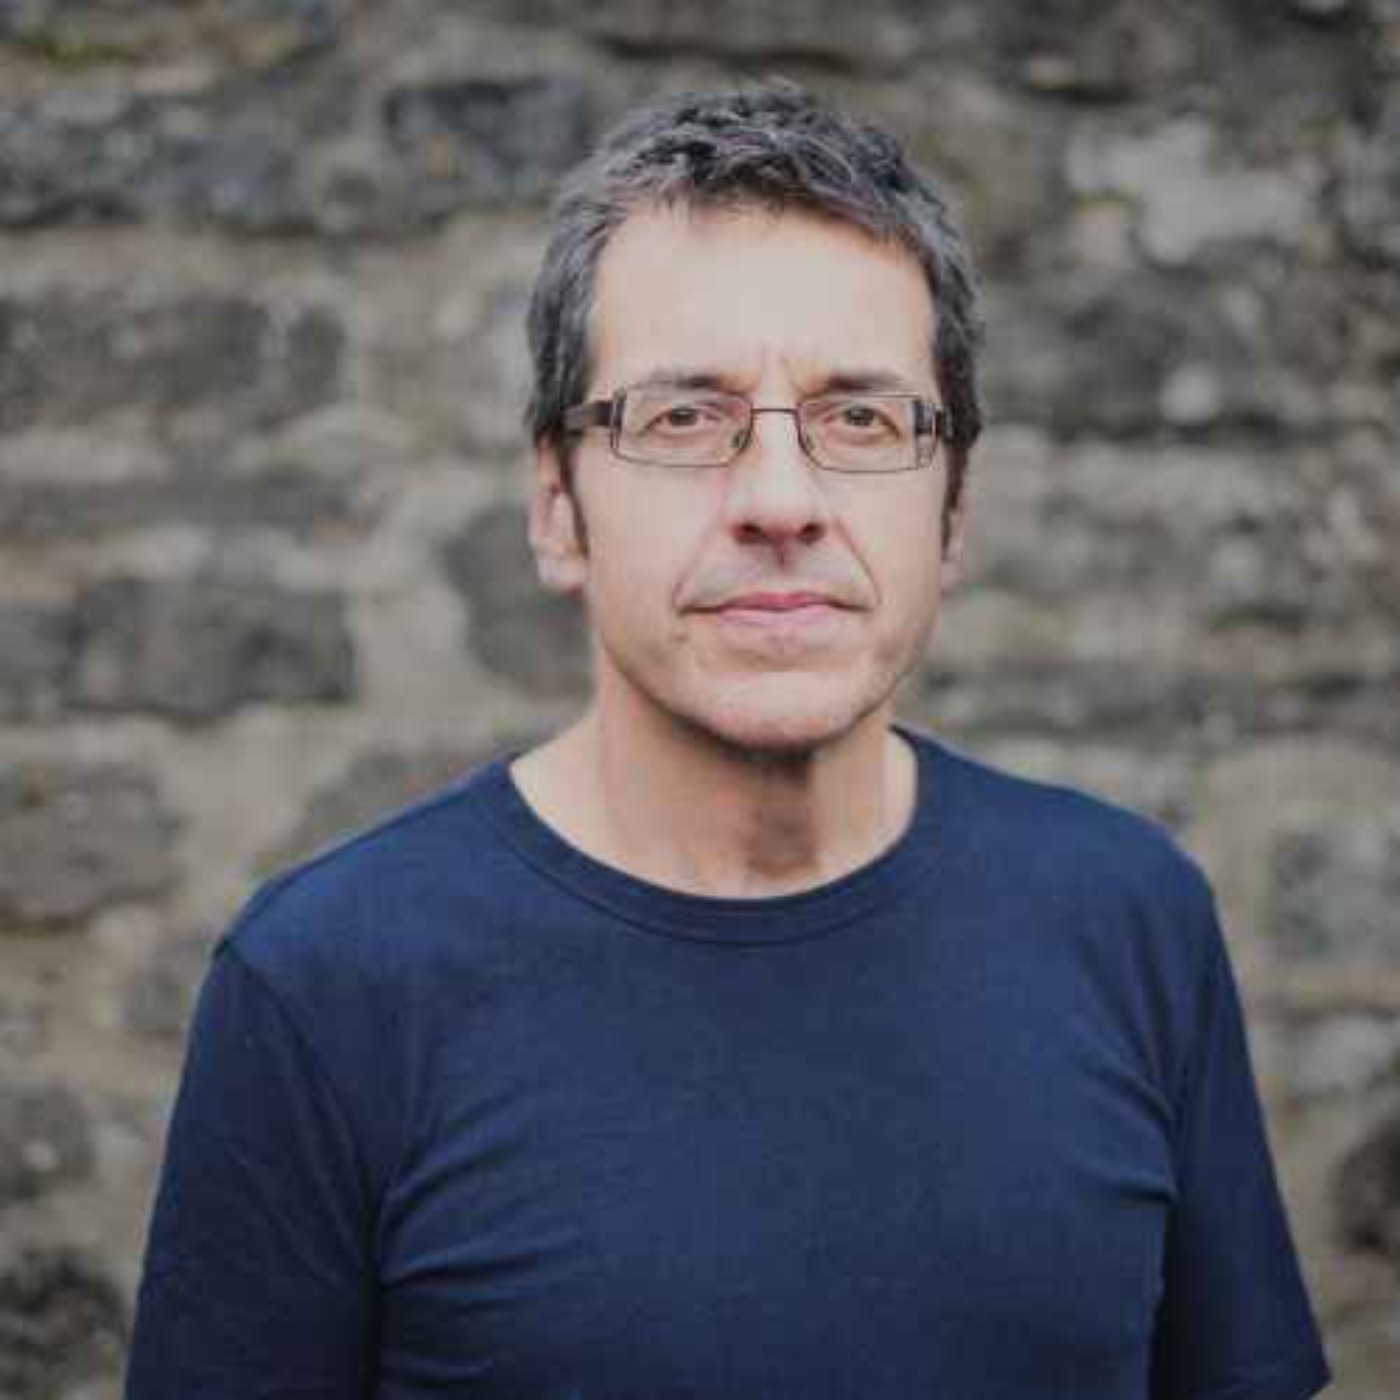 Episode 151: From The Archives - George Monbiot